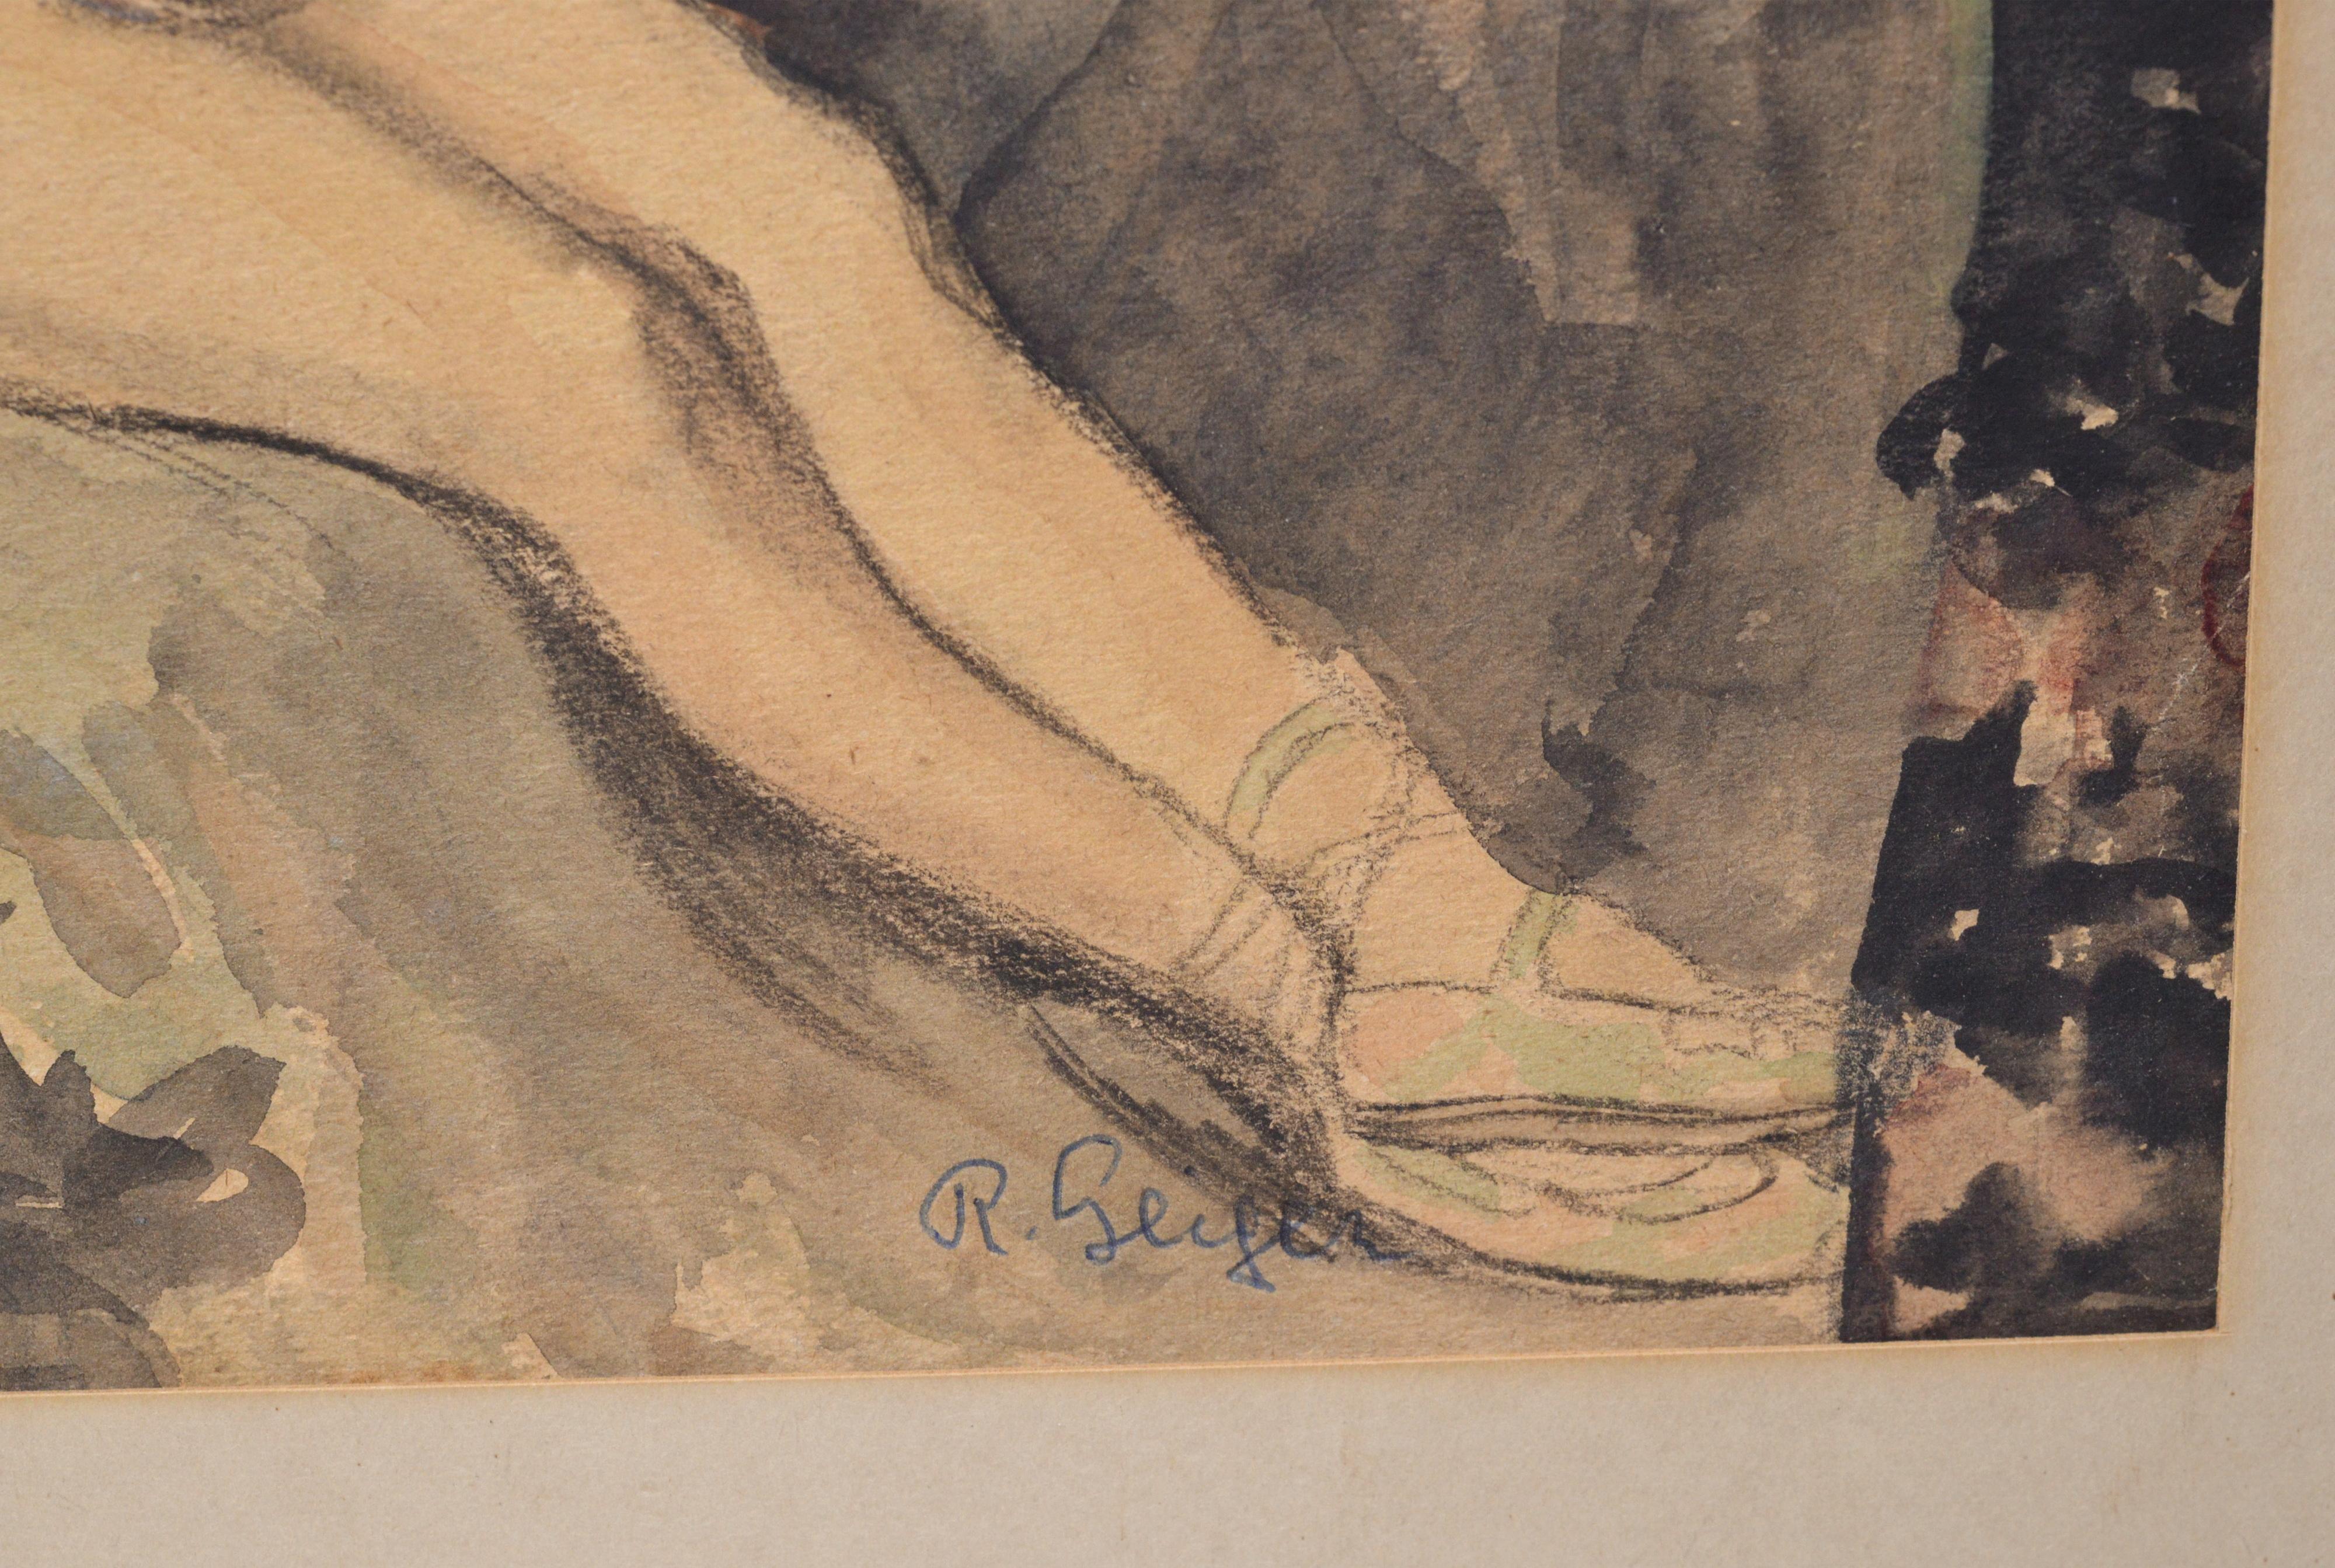 Signed: by Richard Geiger (1870 – 1945), Austrian - Hungarian painter. Also pencils inscriptions on reverse with date 33 (1933). By the 1920s, he worked illustrating books, bookplates and posters. His paintings included portraits, nudes, genre